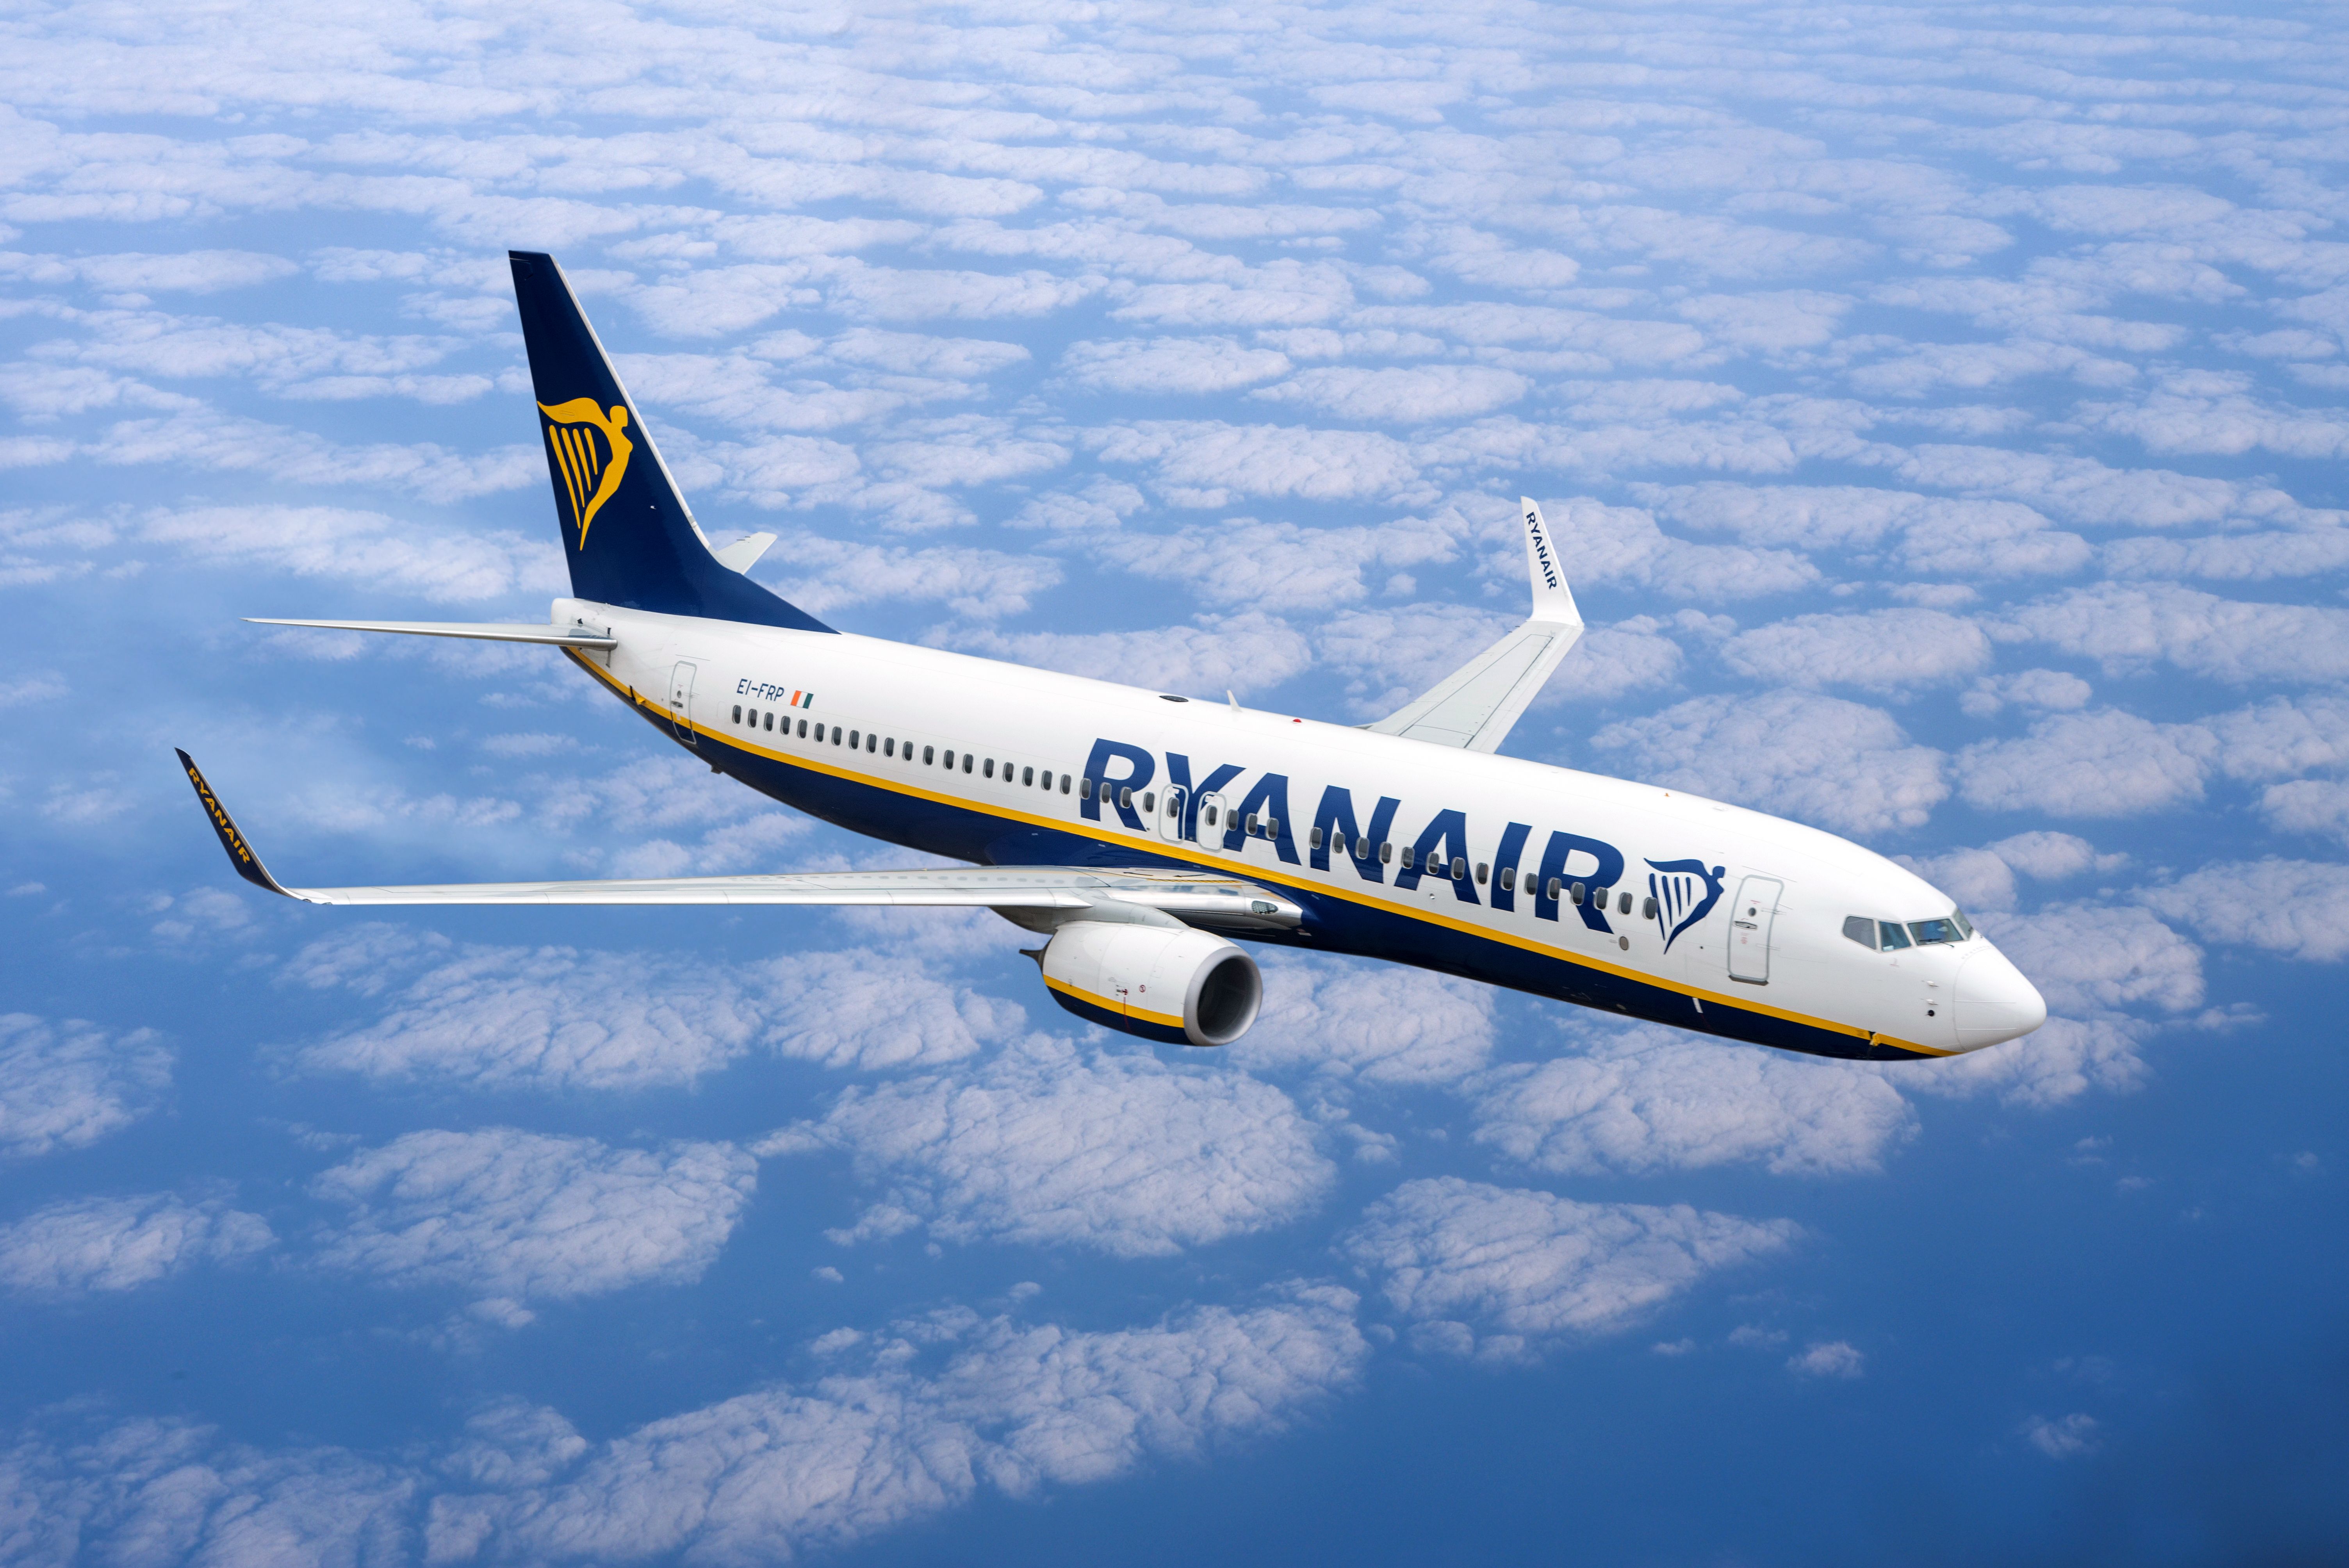 A Ryanair Boeing 737-800 flying above the clouds.